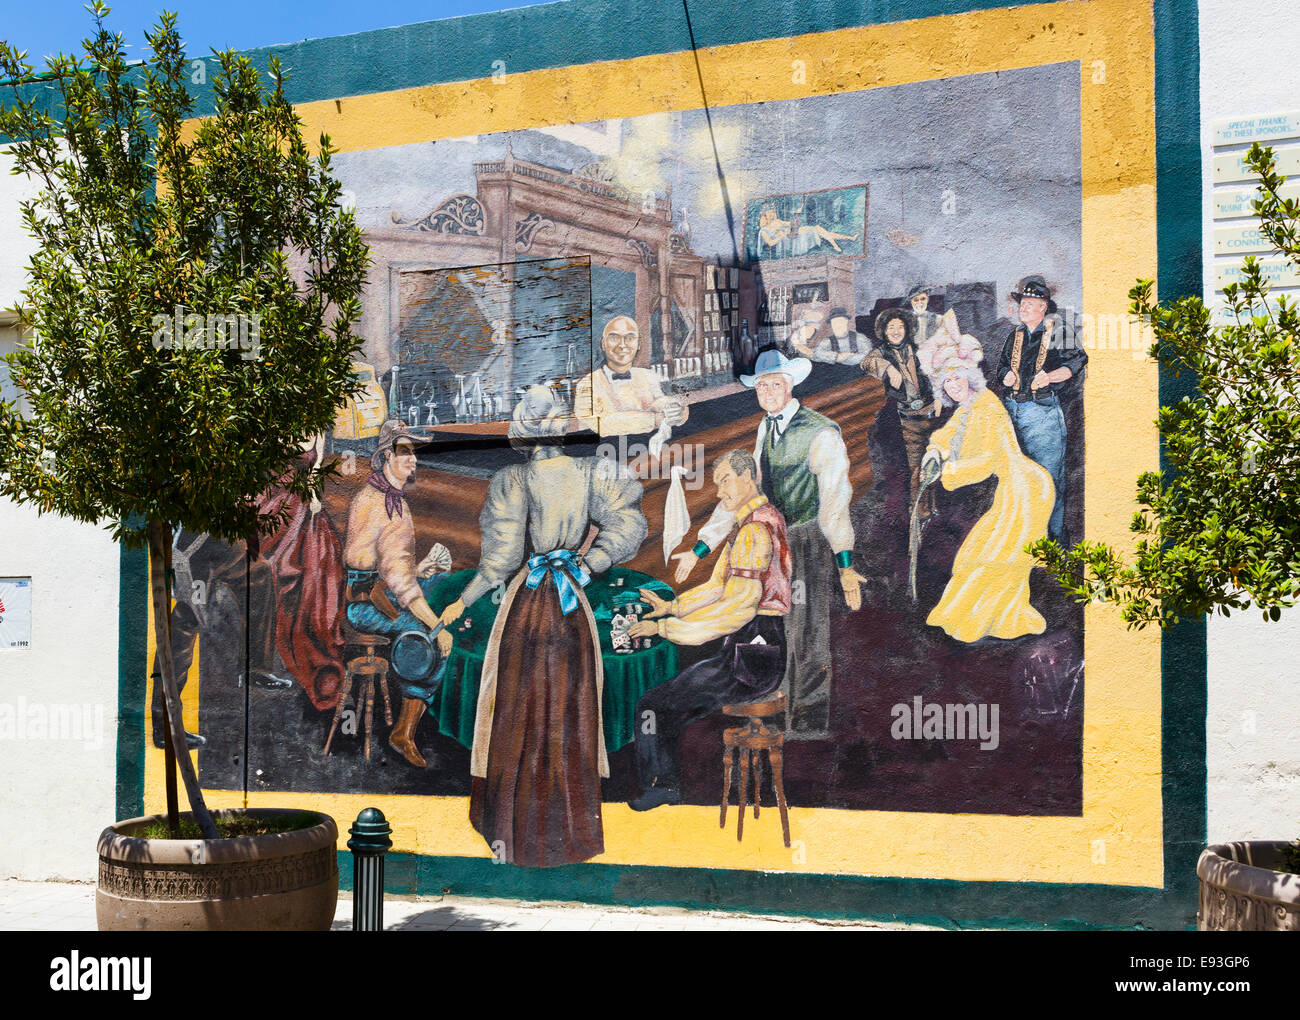 Mural on Wall Street in downtown Bakersfield, Kern County, California, USA Stock Photo